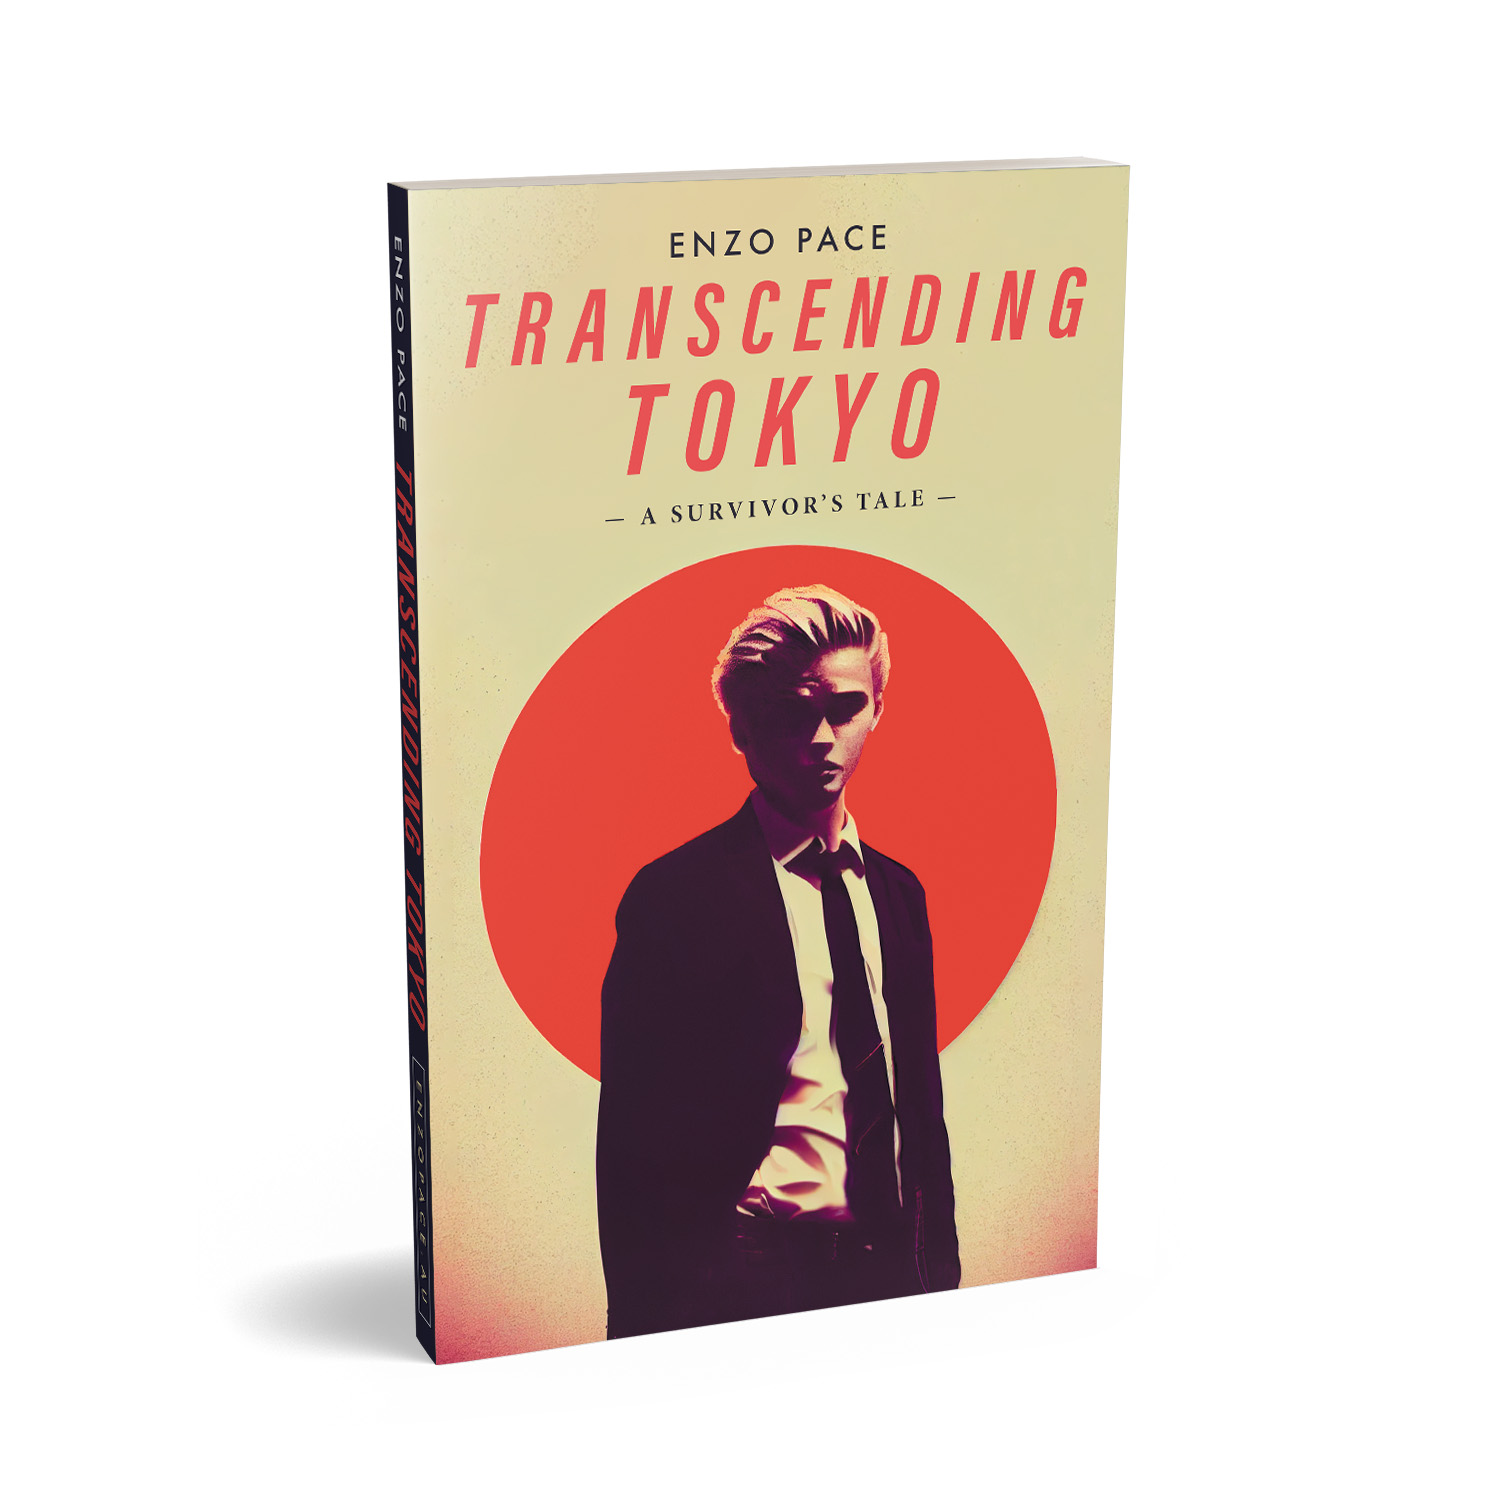 'Transcending Tokyo' is a detailed an immersive culture-clash novel, set in Japan. The author is Enzo Pace. The book cover and interior design are by Mark Thomas. To learn more about what Mark could do for your book, please visit coverness.com.